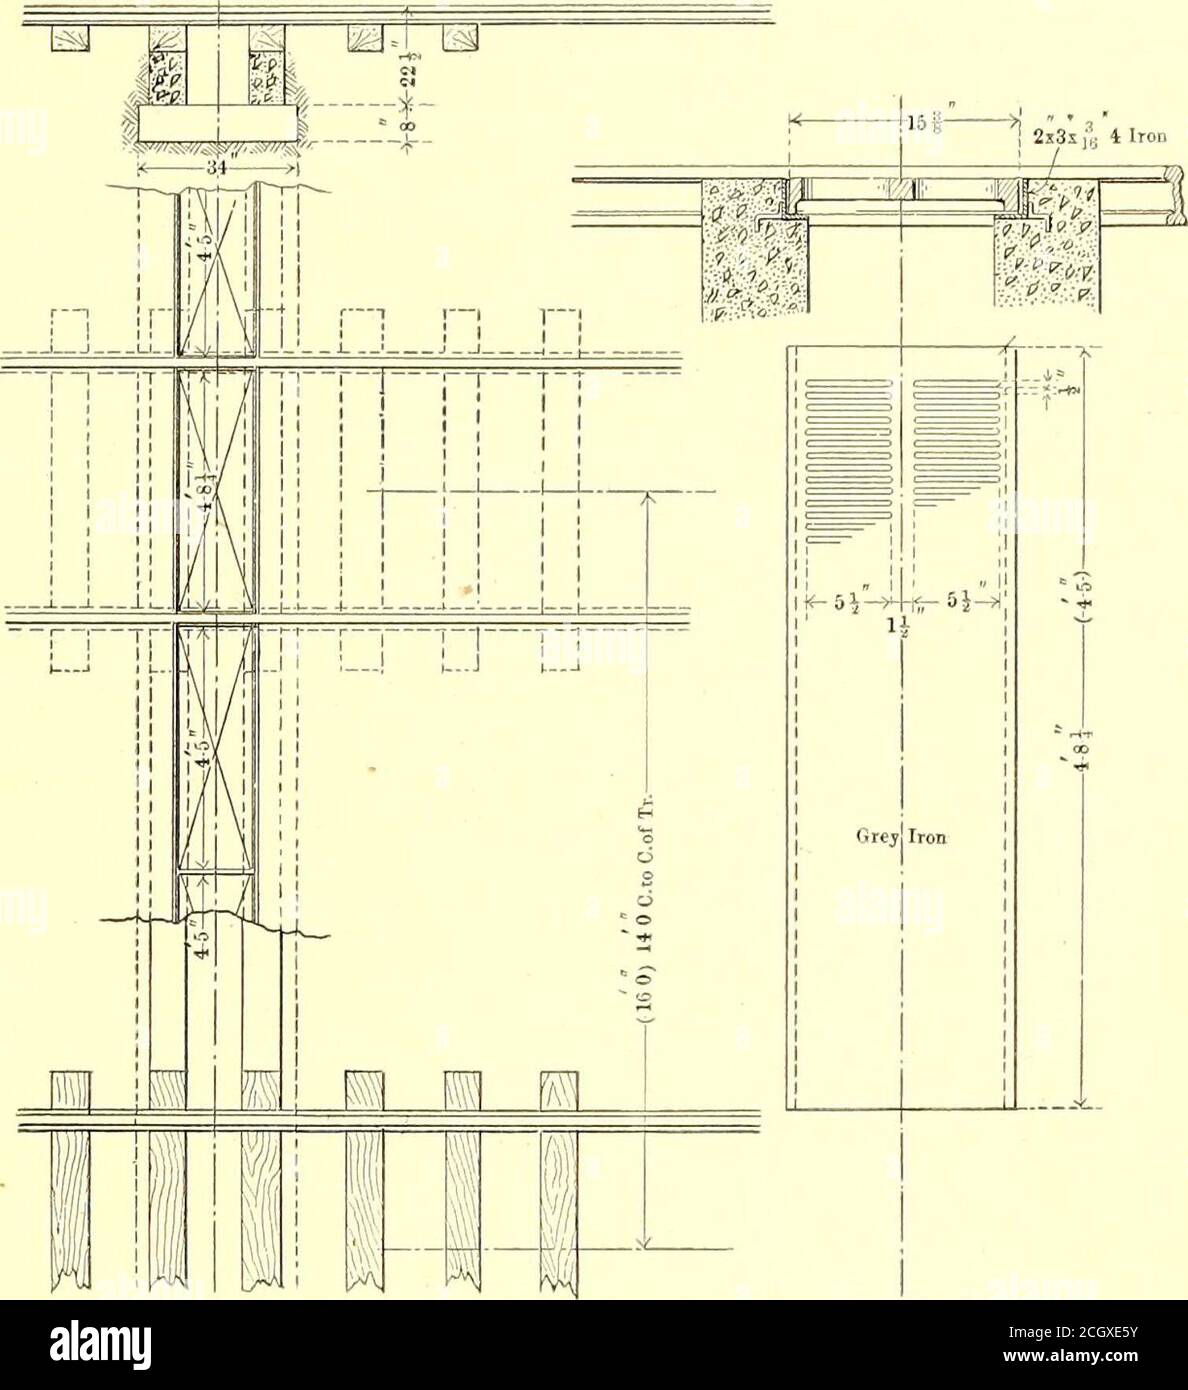 . The Street railway journal . of the house were not in alignmentwith the columns on the east side, so that in bringing the tracksin from the east side the columns came in the door openings.The track spacing was finally arranged so that only four ofthe eight columns have to be removed. The track spacing inthe machine shop is 13 ft. 8 ins. This is not considered anideal spacing, but is practical and the best, considering otherdifficulties to be overcome. The office construction of the first and second floor in theold building is entirely fireproof and of cement and steel con-struction, as that Stock Photo